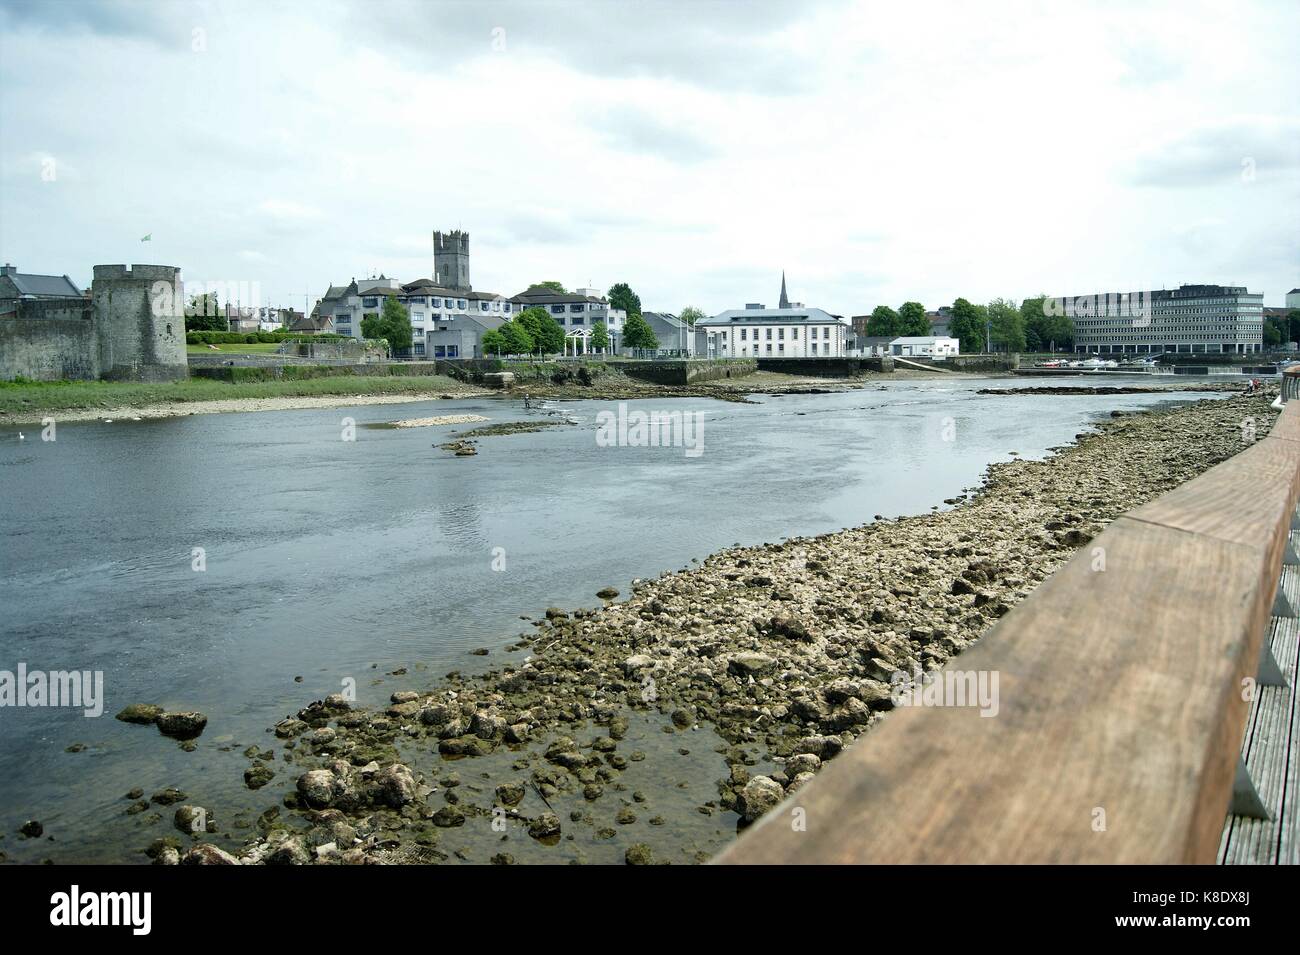 The River Shannon at Limerick Ireland Stock Photo